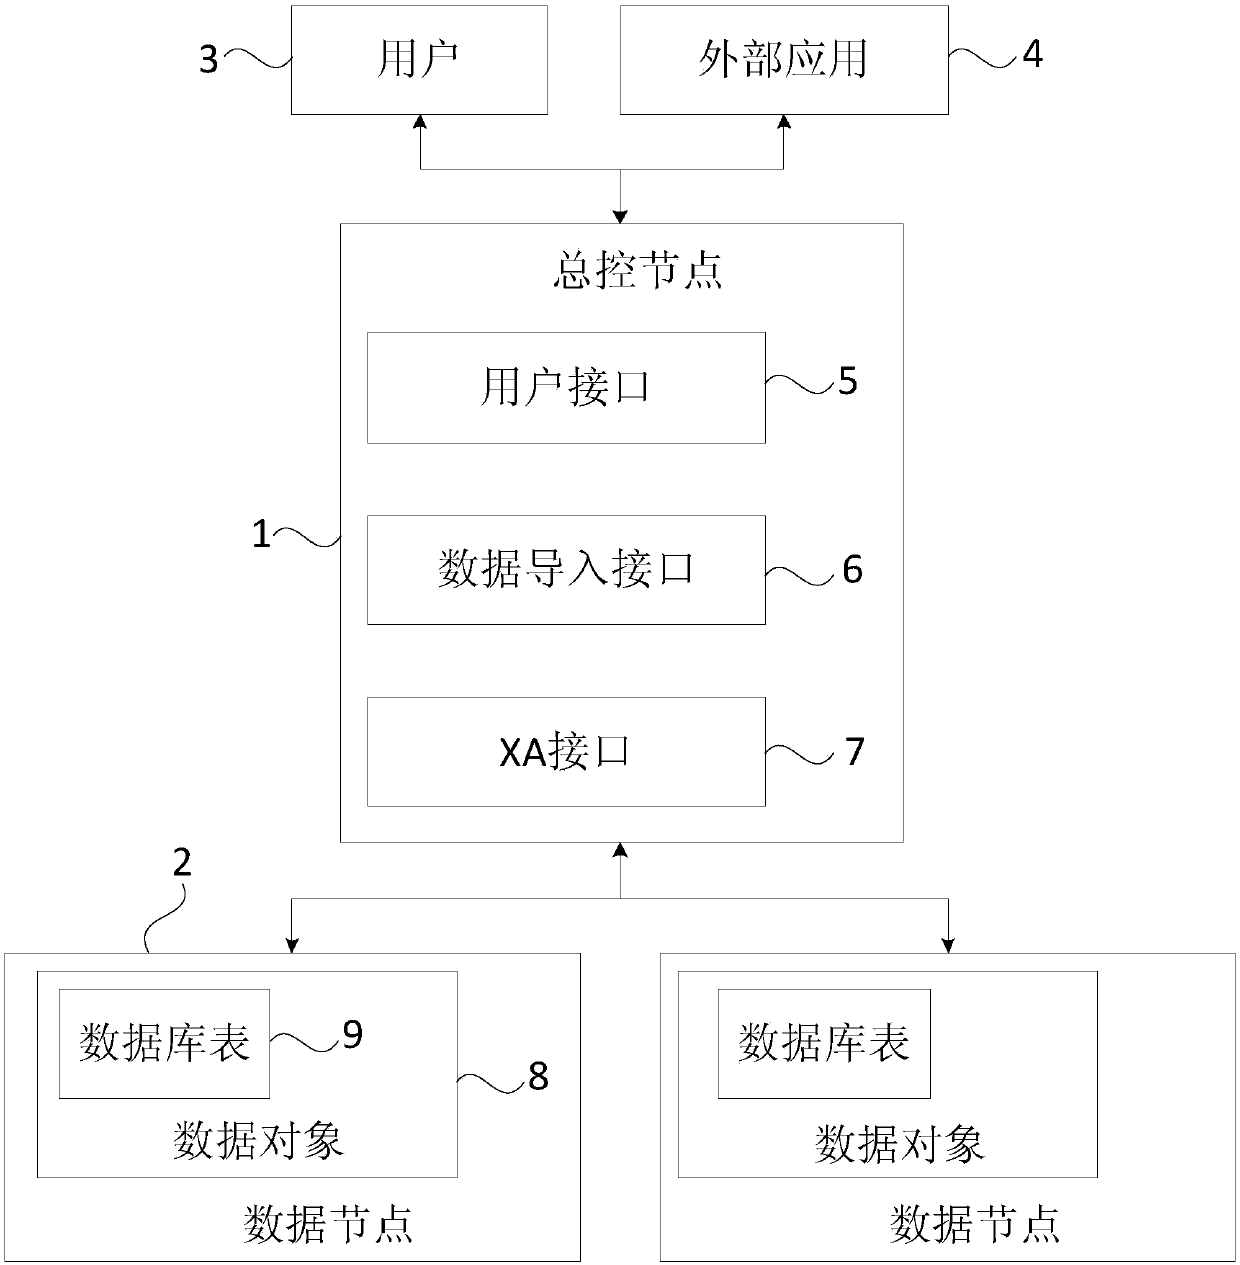 Distributed database management system, method and apparatus